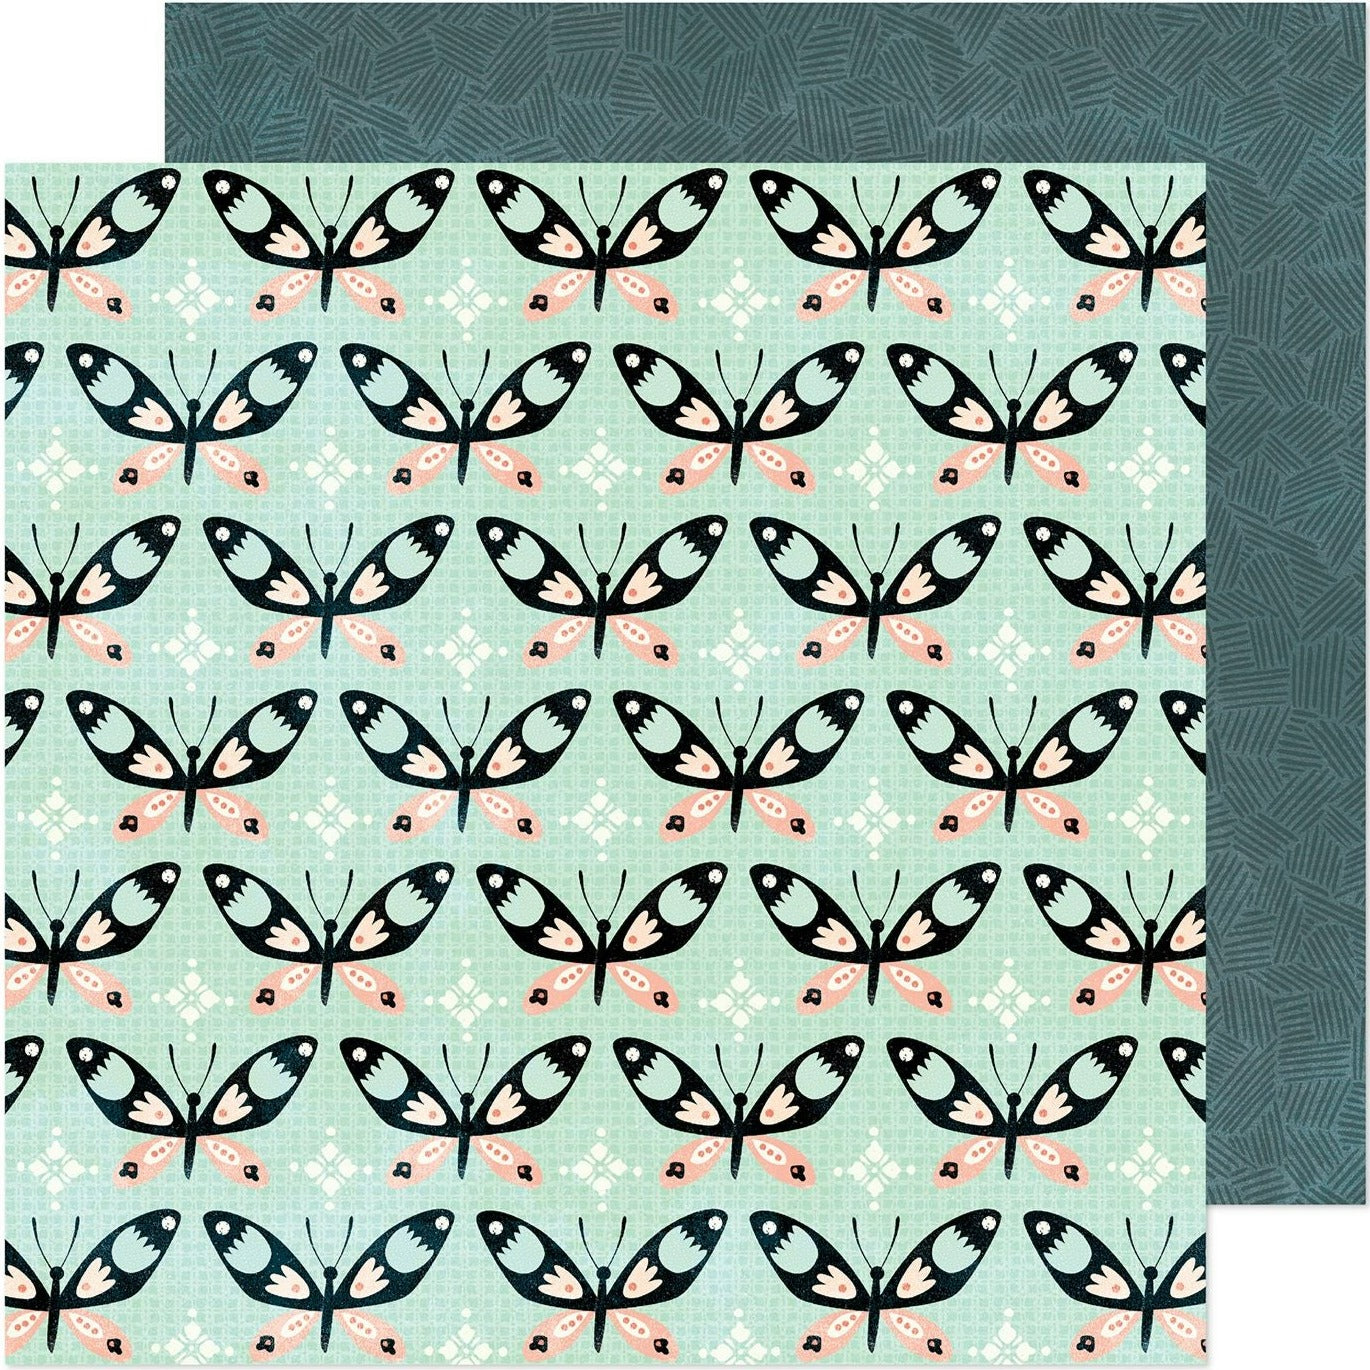 (Side A - black & pink butterflies on an aqua background, Side B -  dark blue background with groups of navy blue lines going in different directions)